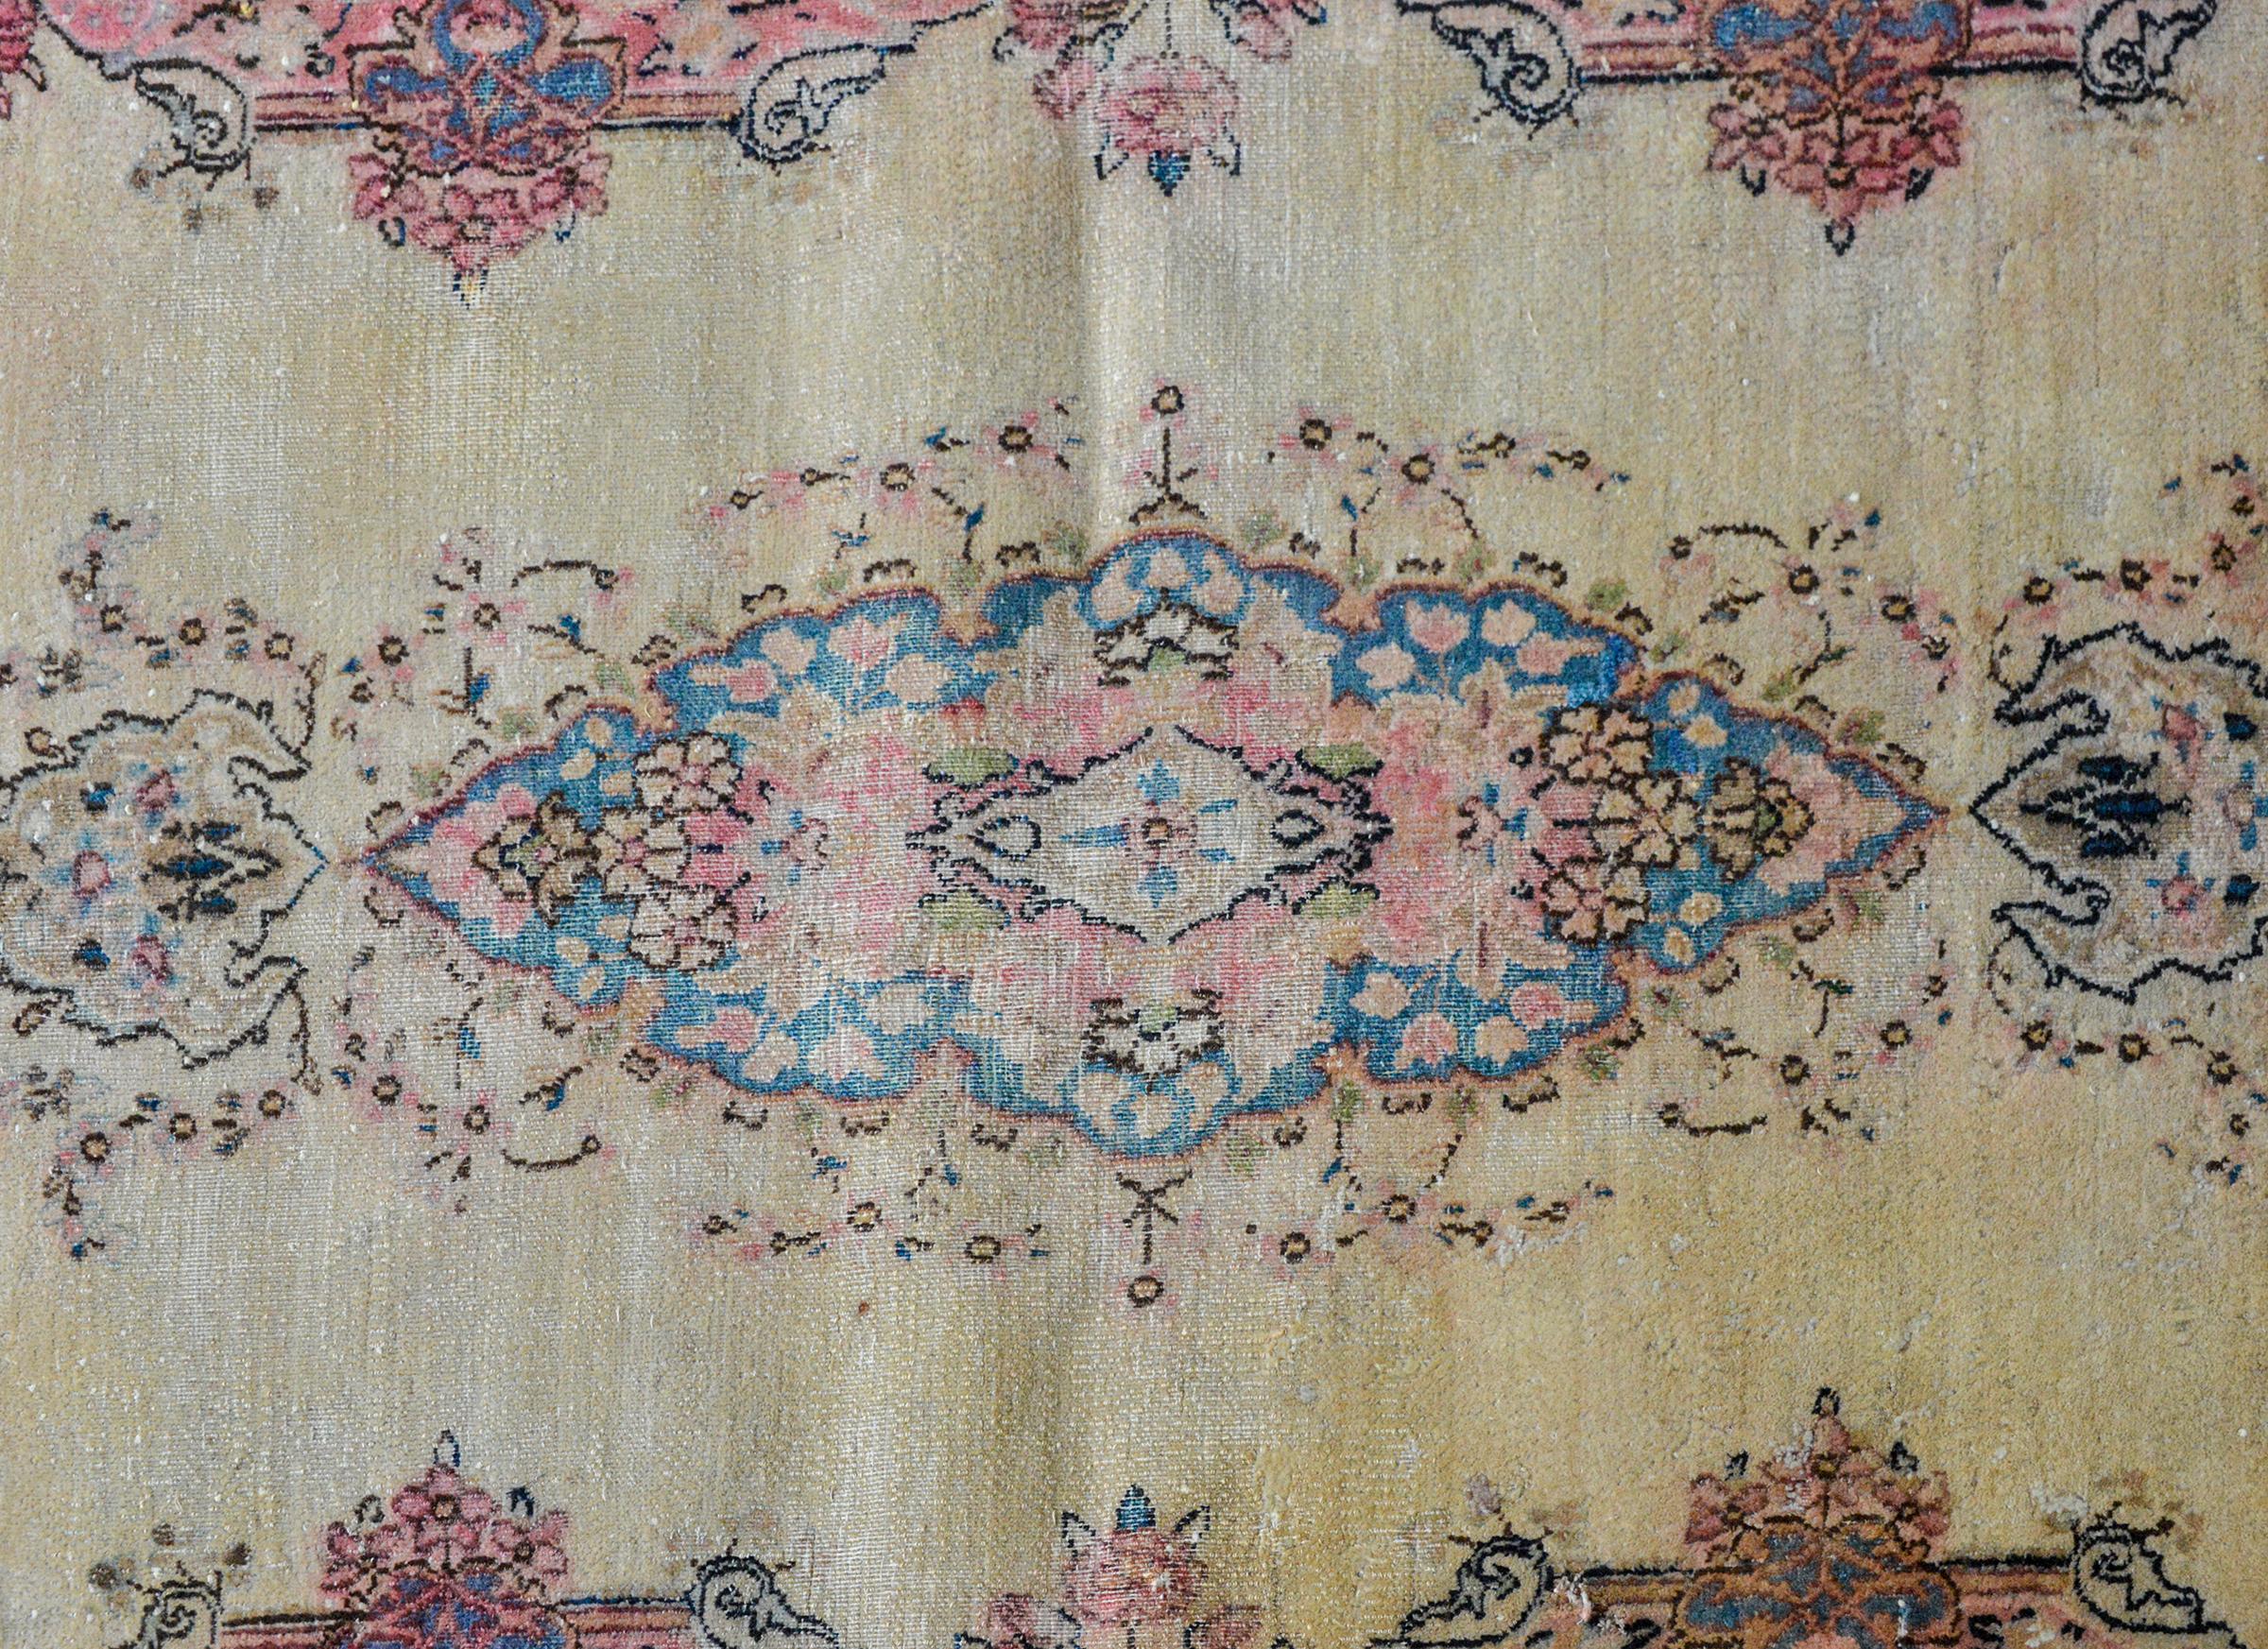 An unusual early 20th century Persian Kirman rug with a long ovoid central floral medallion woven in light indigo plink and cream, against a solid champagne, and surrounded by a wide floral patterned border.